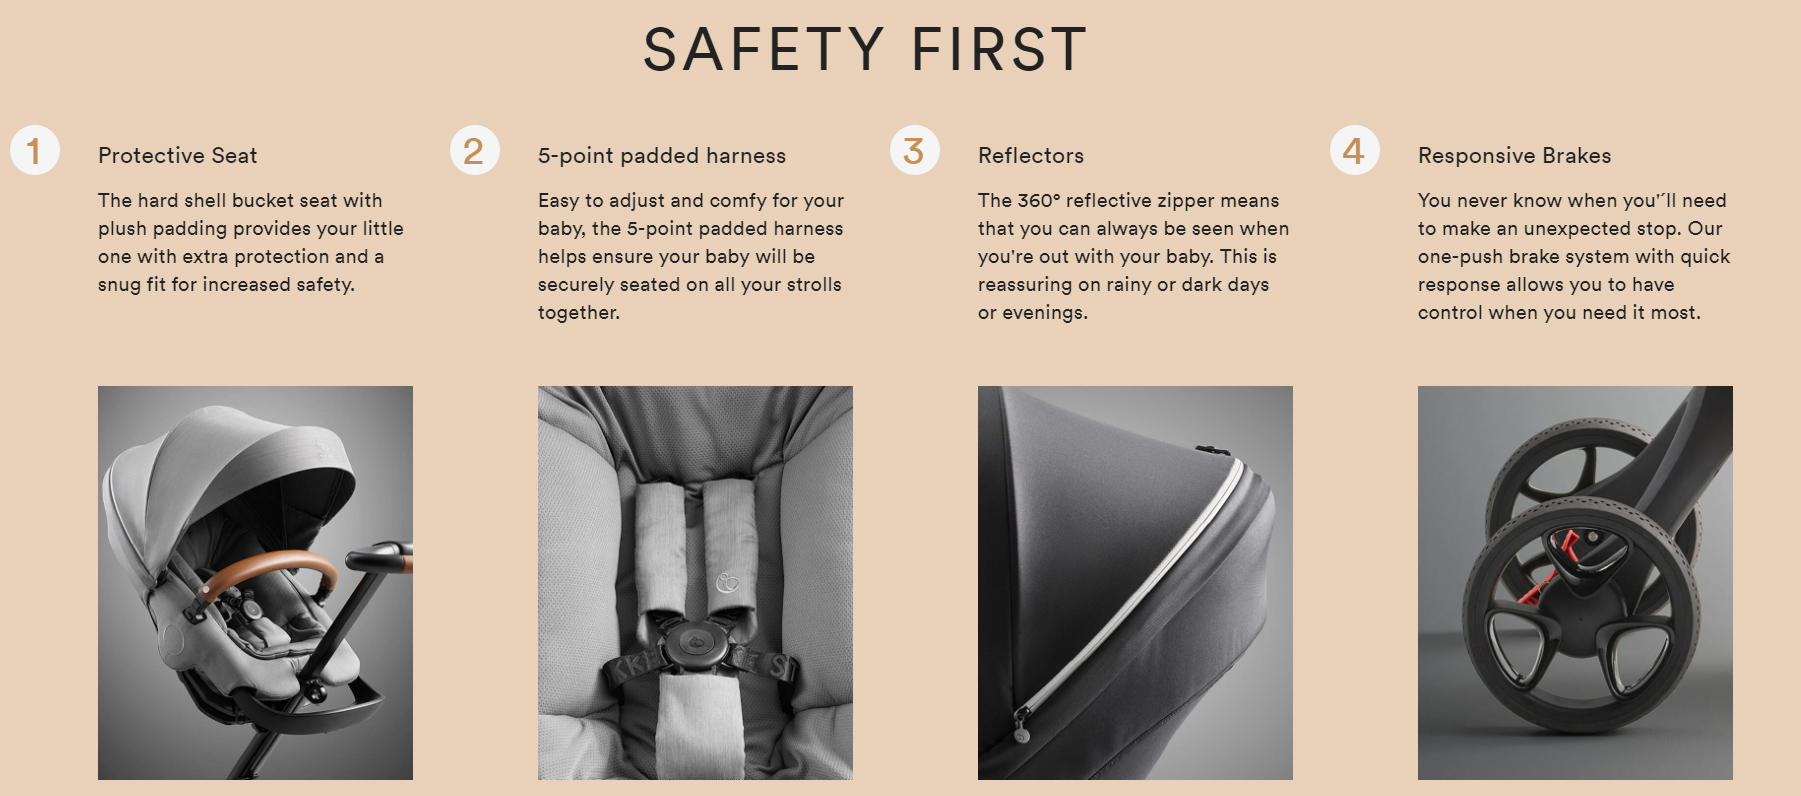 Xplory Stroller Safety Features